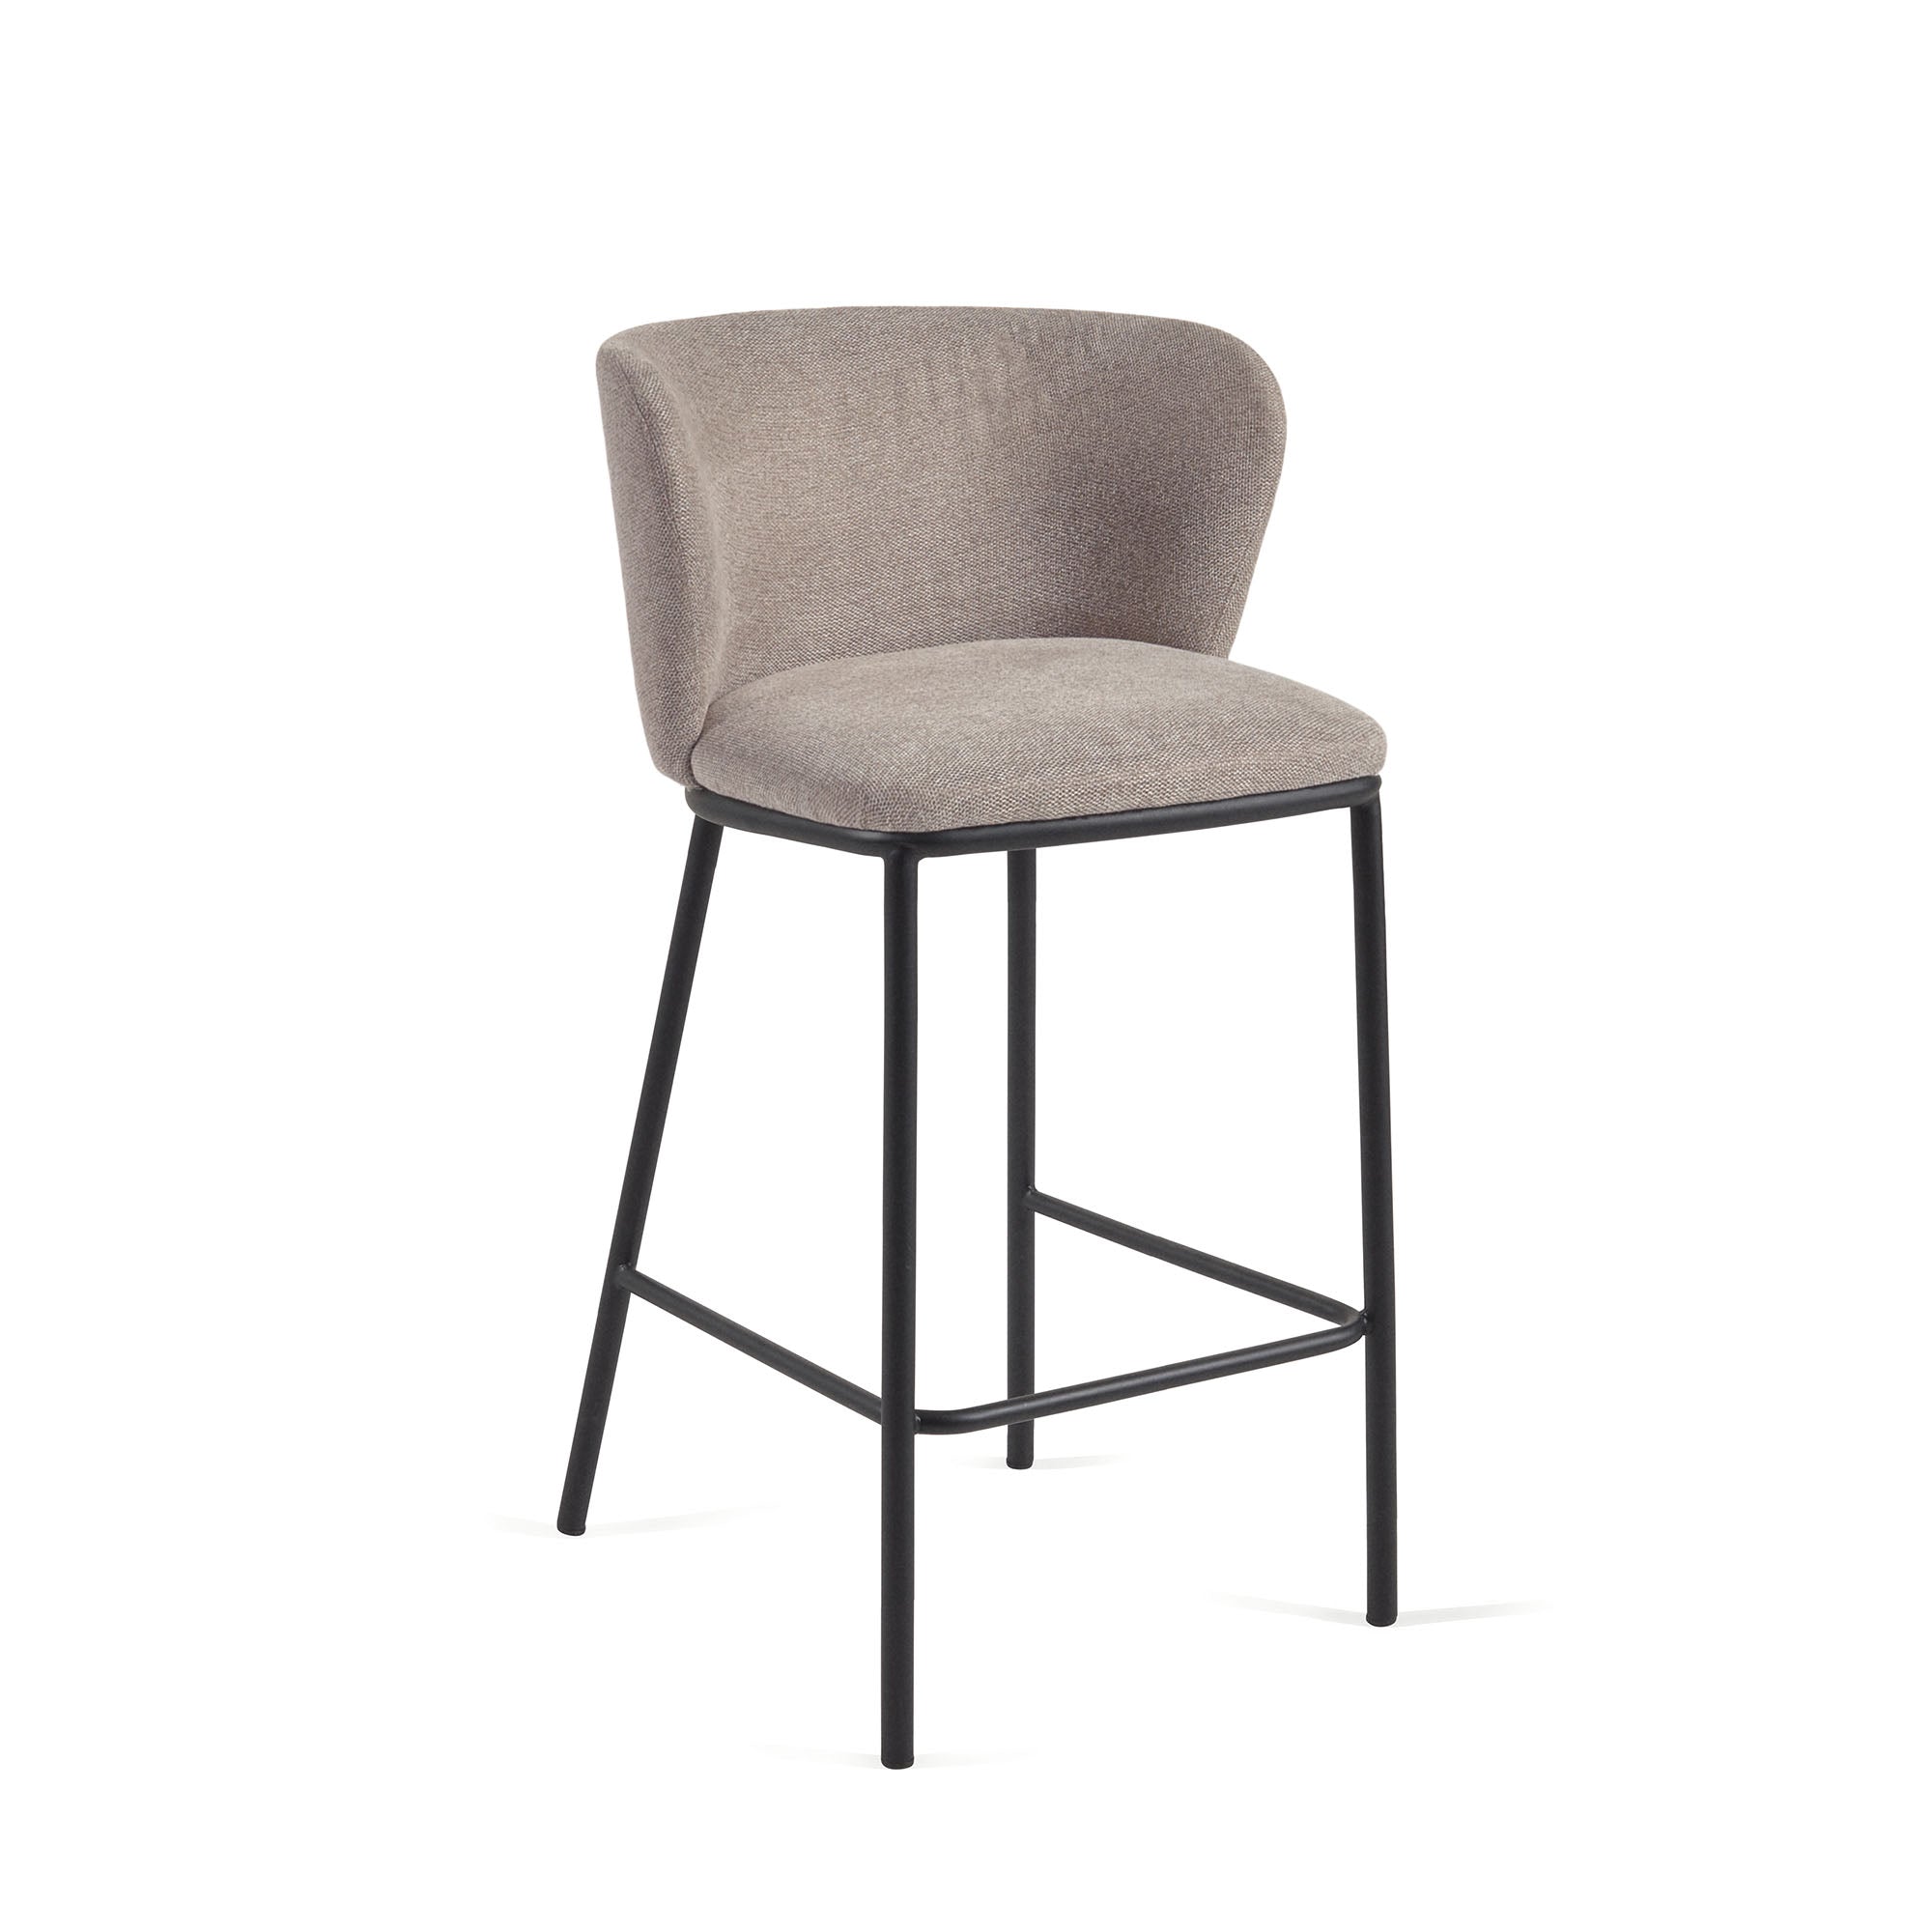 Ciselia stool in brown chenille with steel legs in black finish, 65 cm height